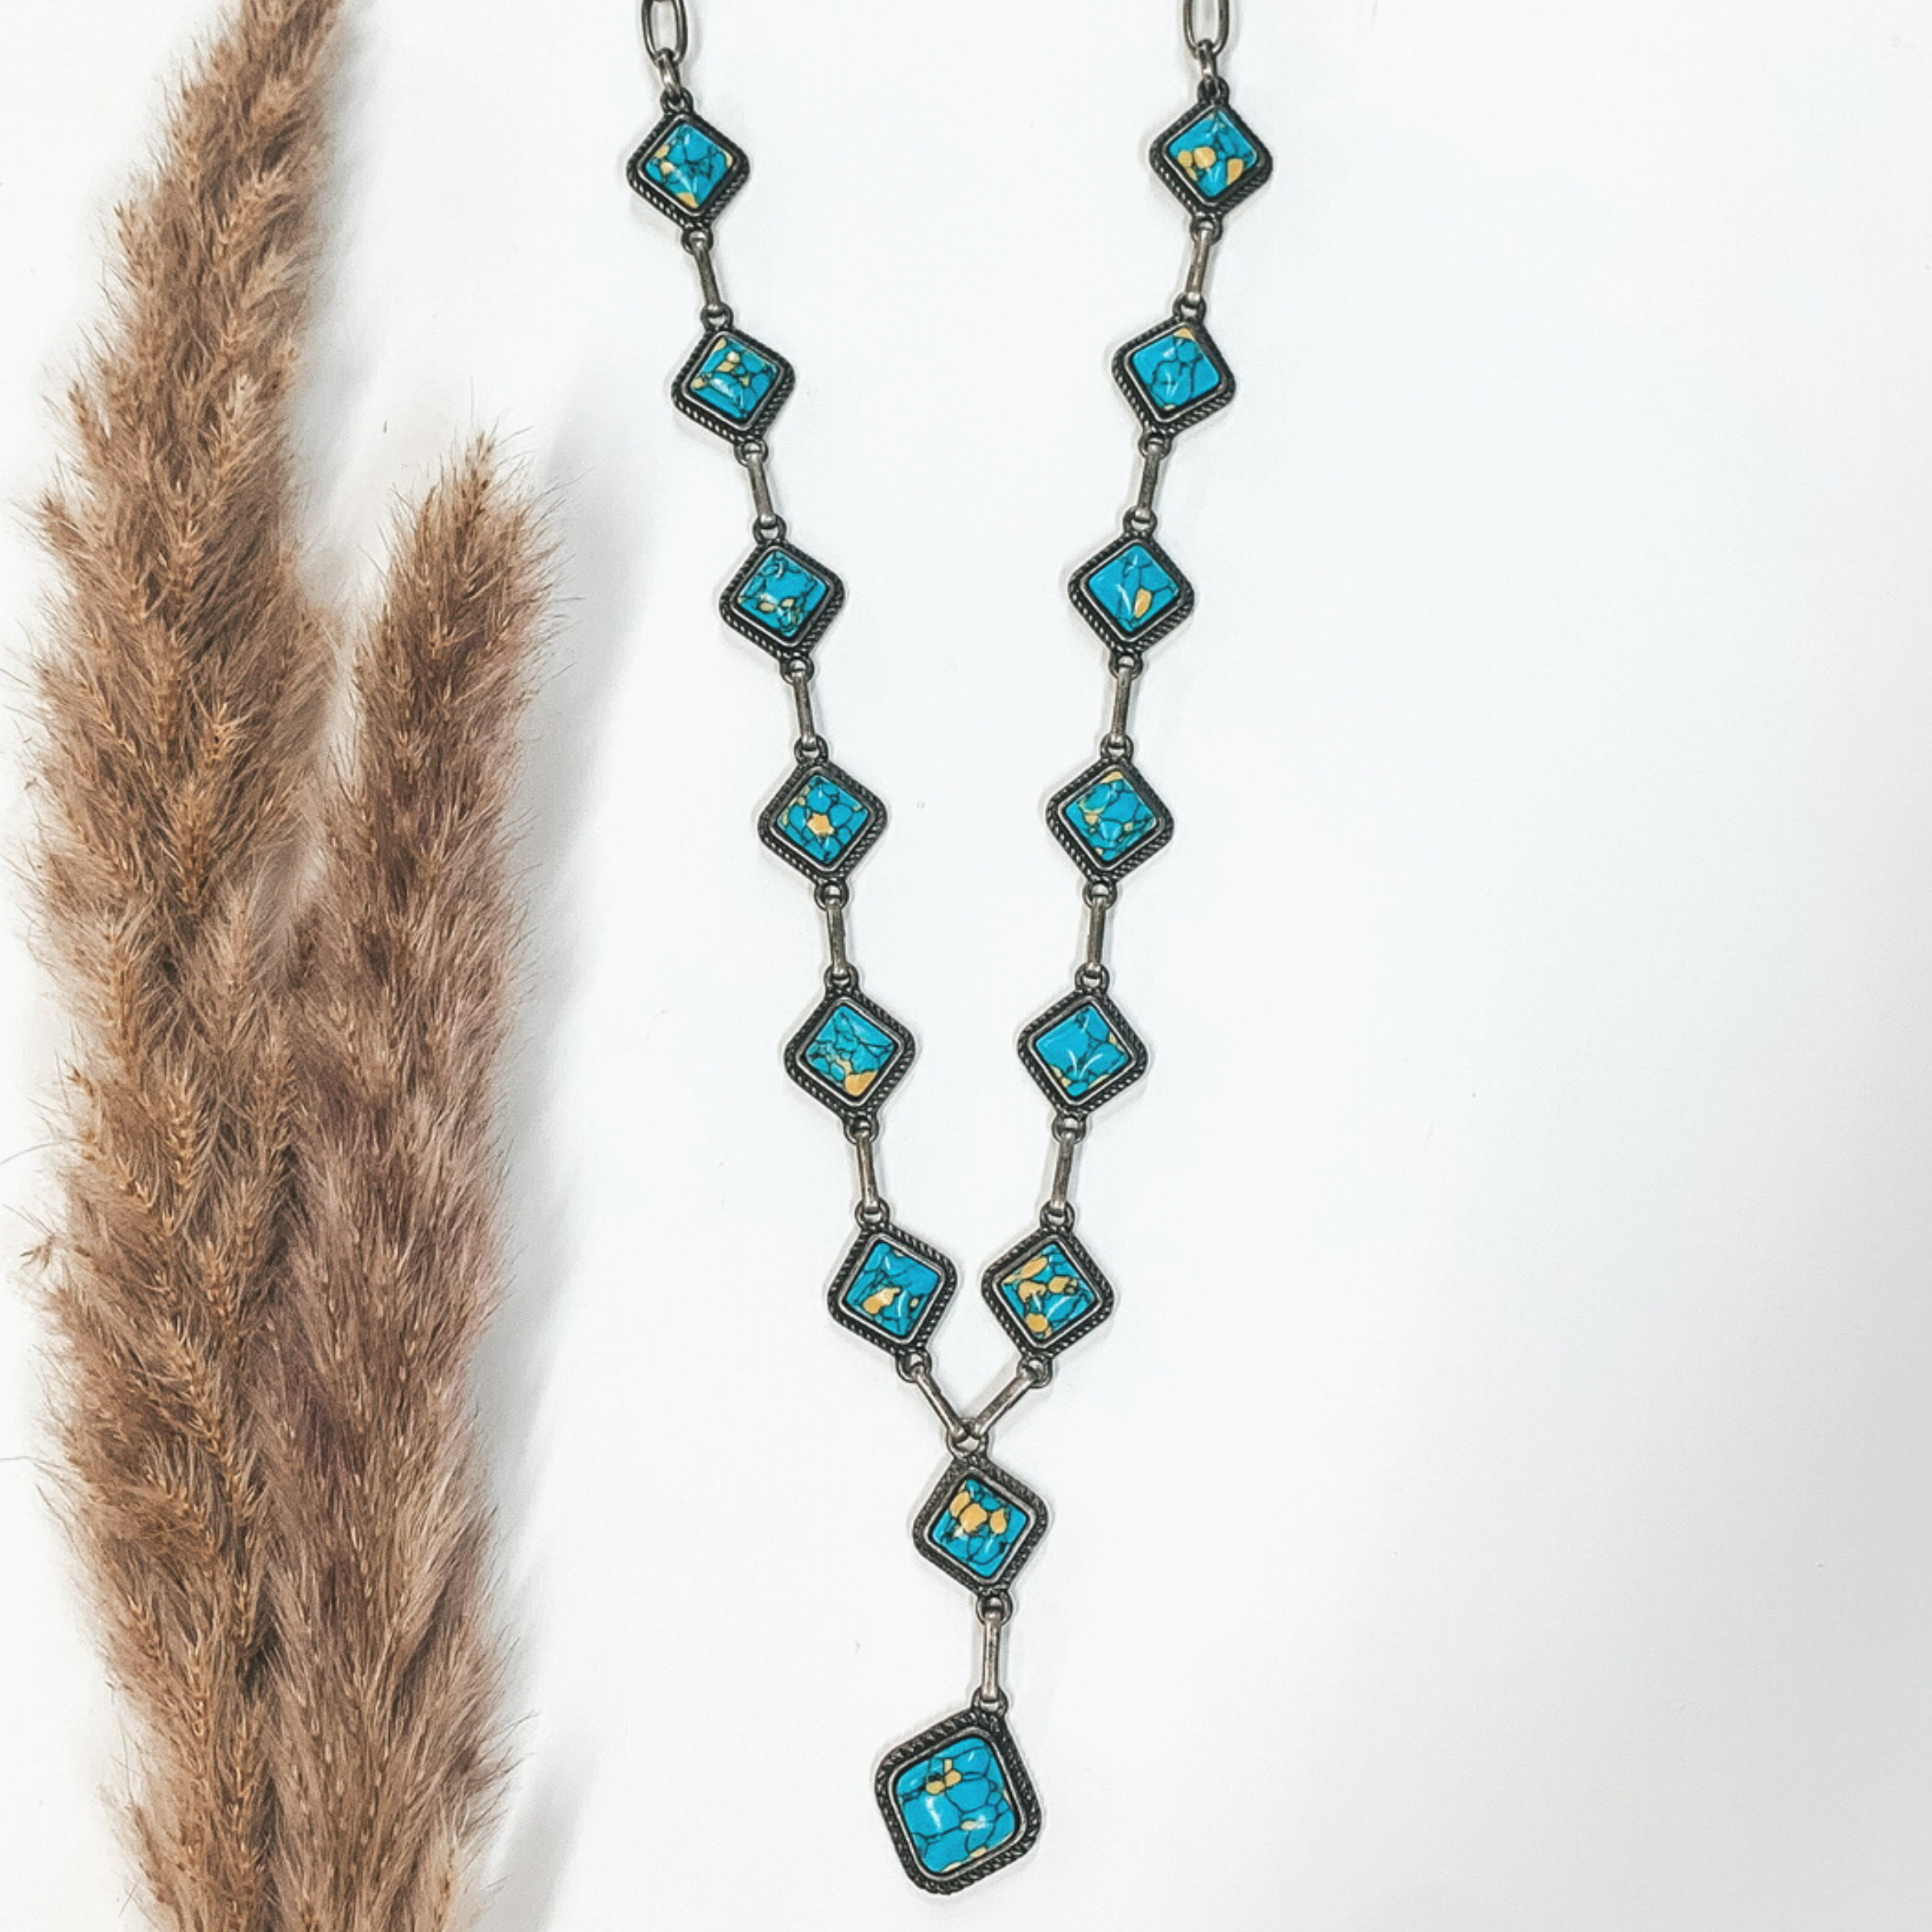 Silver Chain Necklace with Turquoise Square Stones - Giddy Up Glamour Boutique